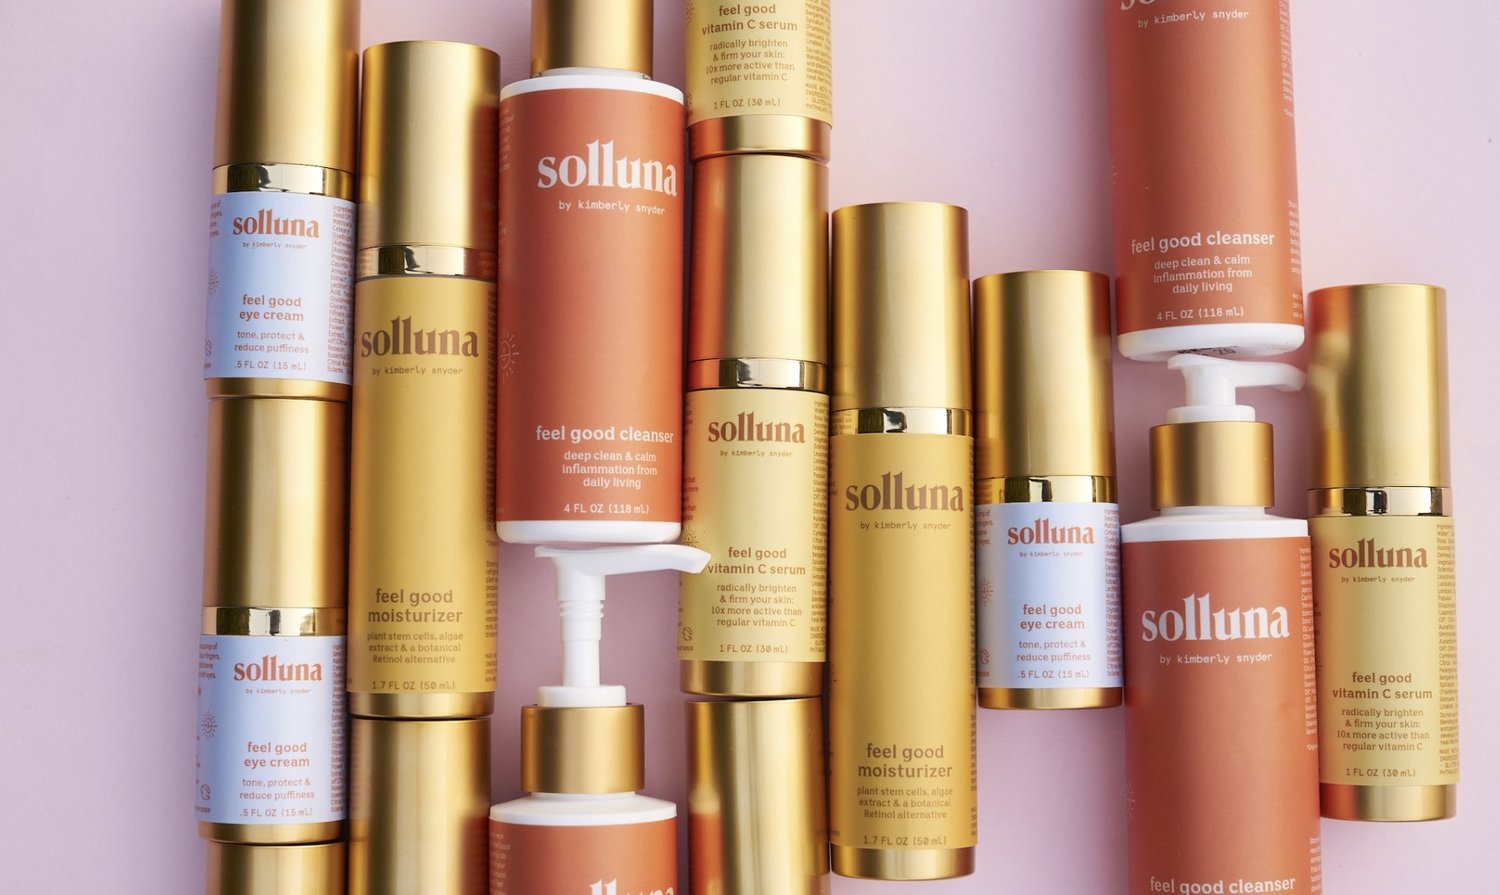 Solluna Skincare Collection Design Reflects the Warmth of Sunshine and Cleansing Ocean Air